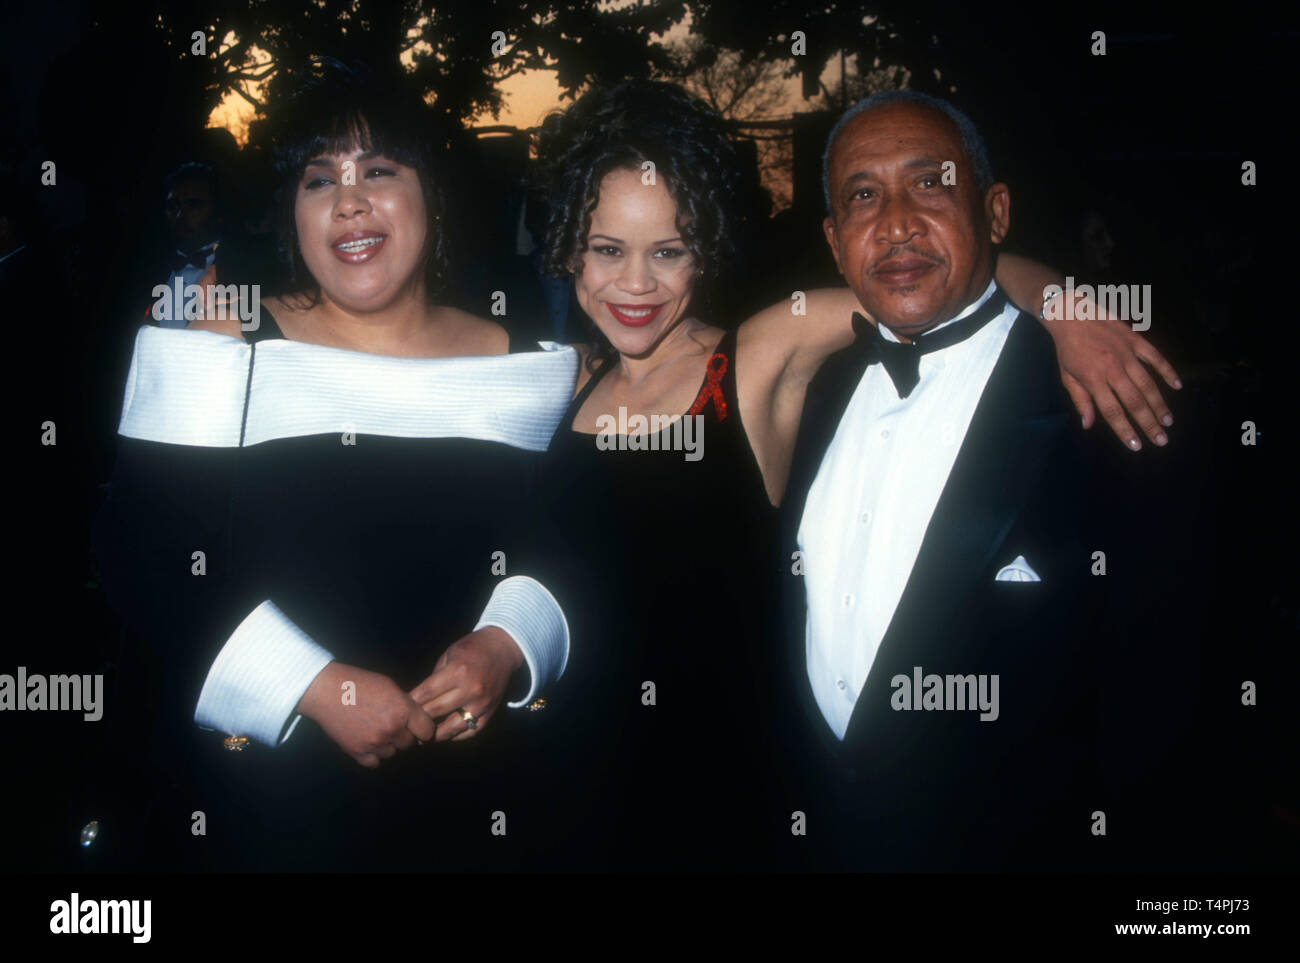 Los Angeles, California, USA 21st March 1994  Actress Rosie Perez and father Ismael Serrano attend the 66th Annual Academy Awards on March 21, 1994 at Dorothy Chandler Pavilion in Los Angeles, California, USA. Photo by Barry King/Alamy Stock Photo Stock Photo